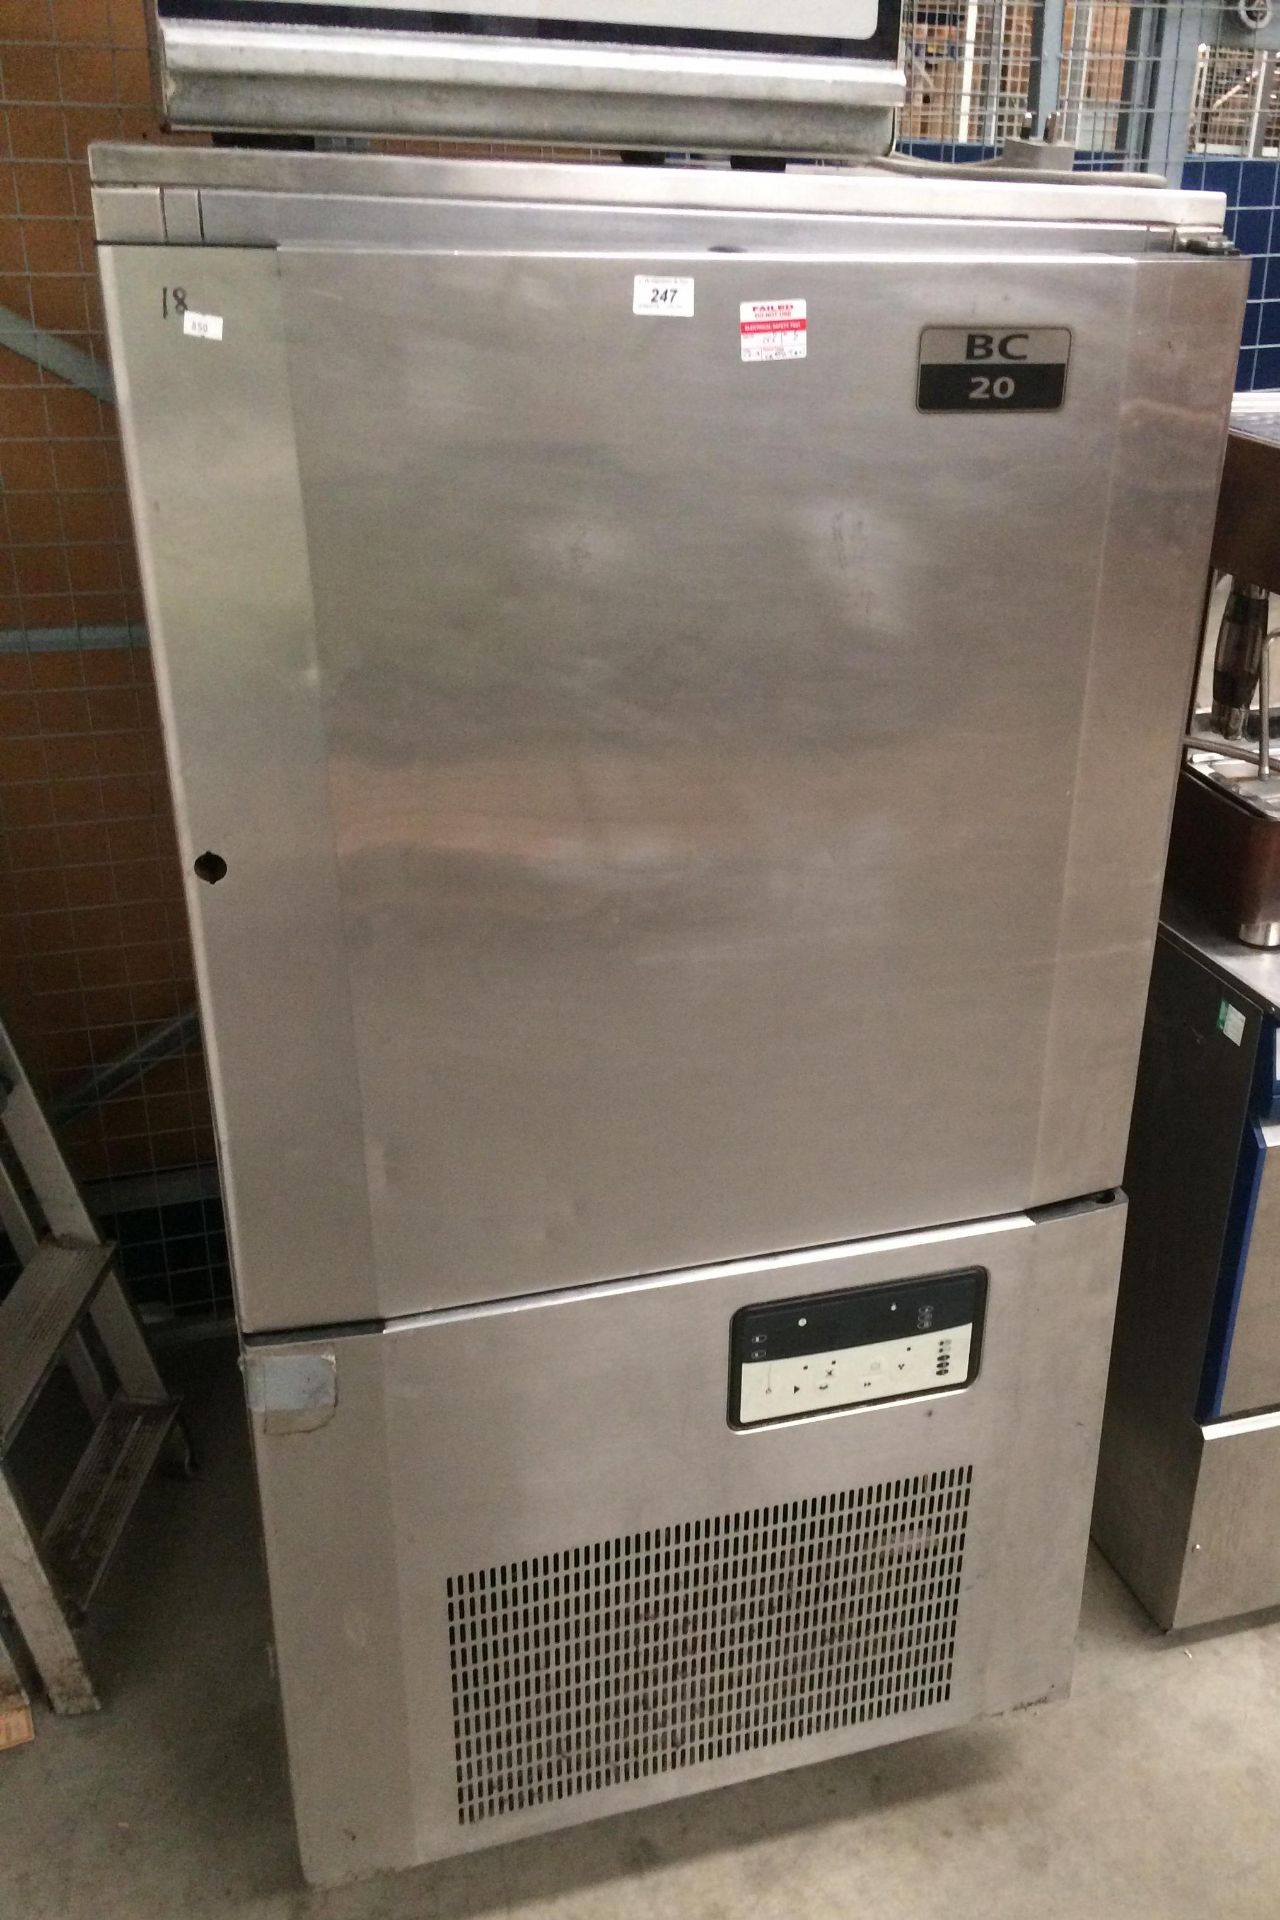 A Foster BC20 stainless steel blast chiller - 240v